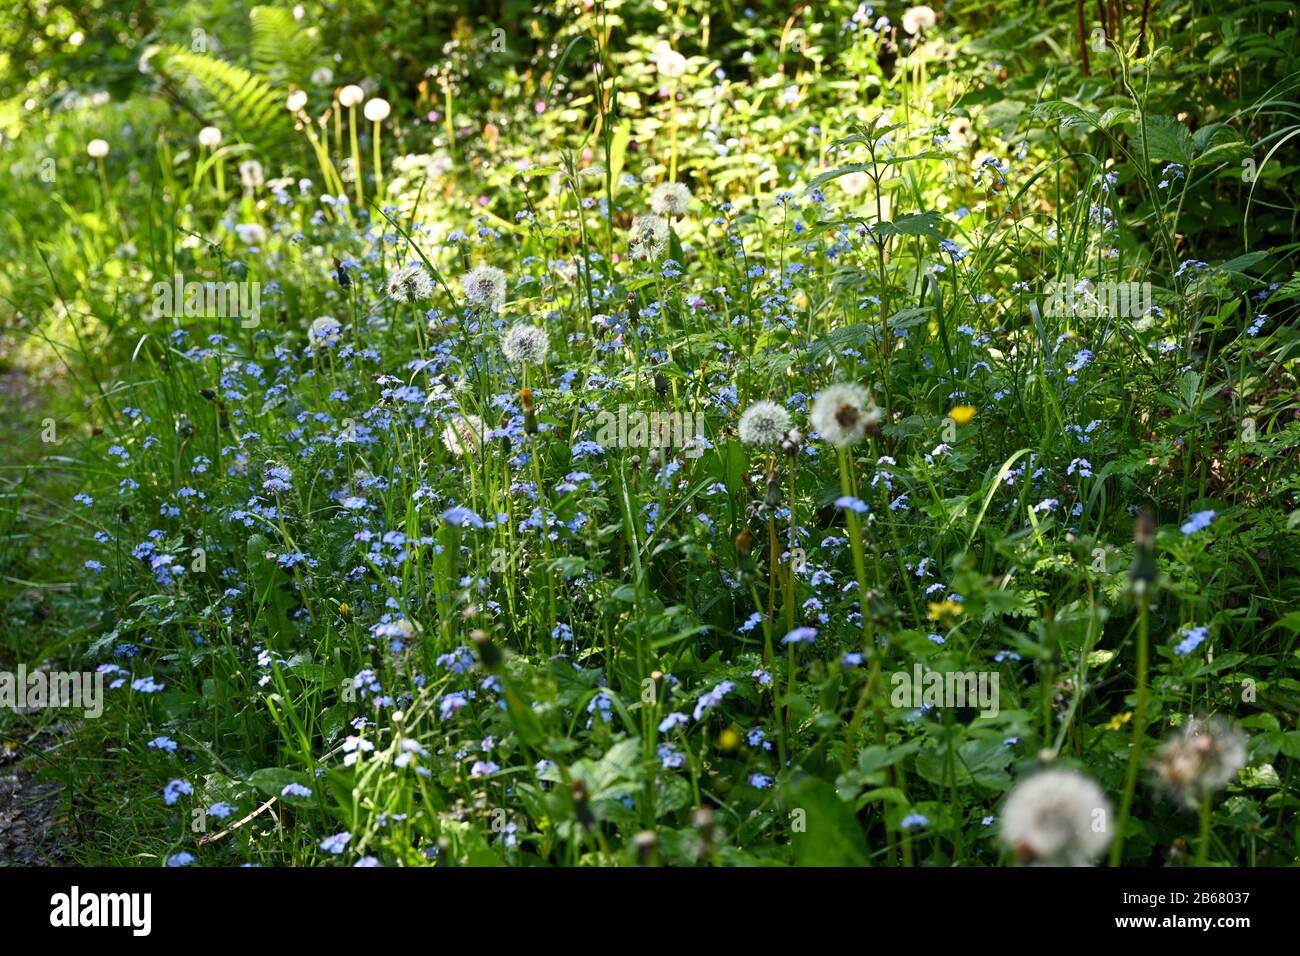 Image of an overgrown area of a garden now a mass of flowers and weeds, set aside for wildlife taken on a sunny summers day. Stock Photo